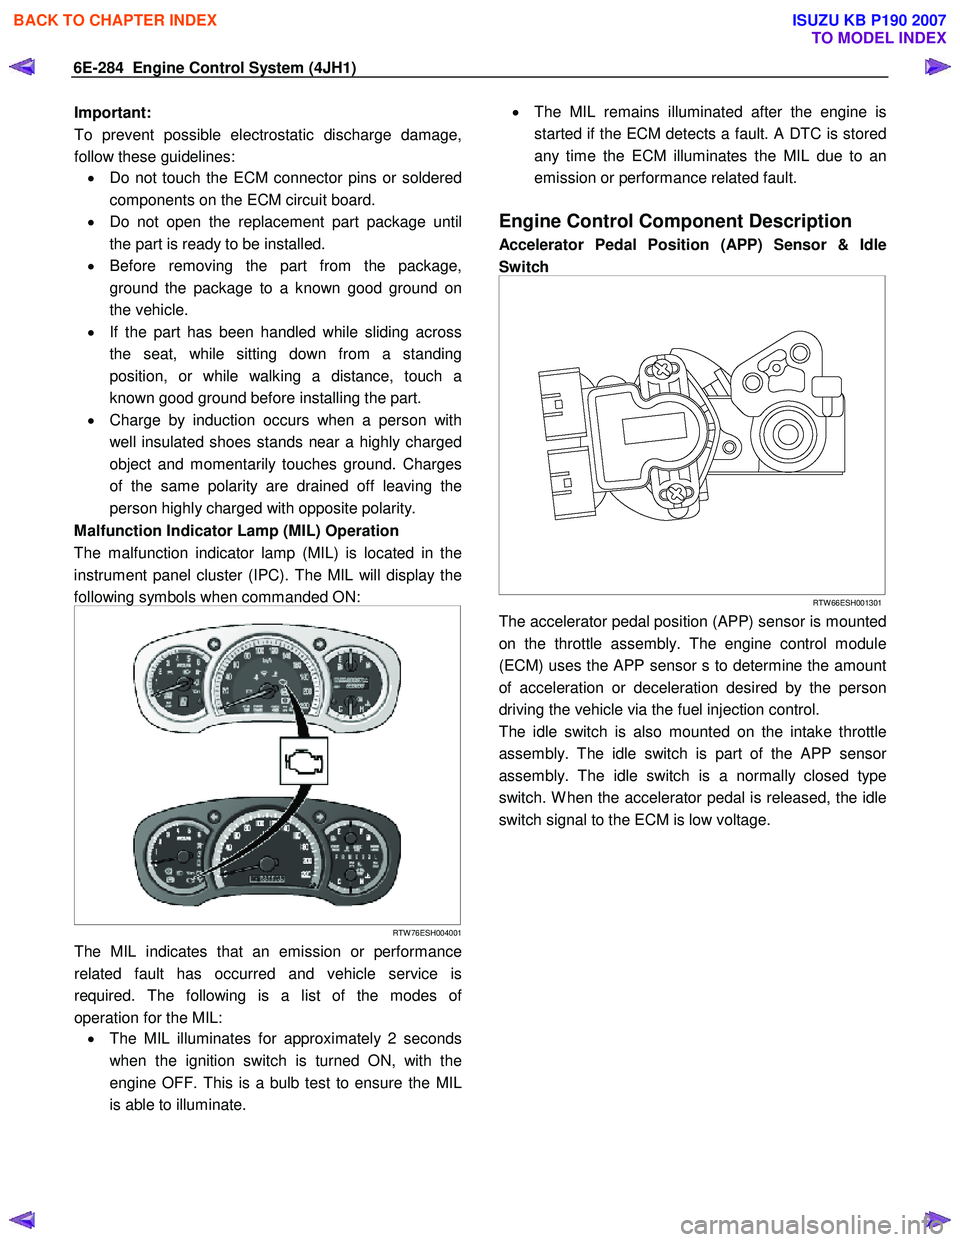 ISUZU KB P190 2007  Workshop User Guide 6E-284  Engine Control System (4JH1) 
Important:   
To prevent possible electrostatic discharge damage, 
follow these guidelines:  •  Do not touch the ECM connector pins or soldered
components on th